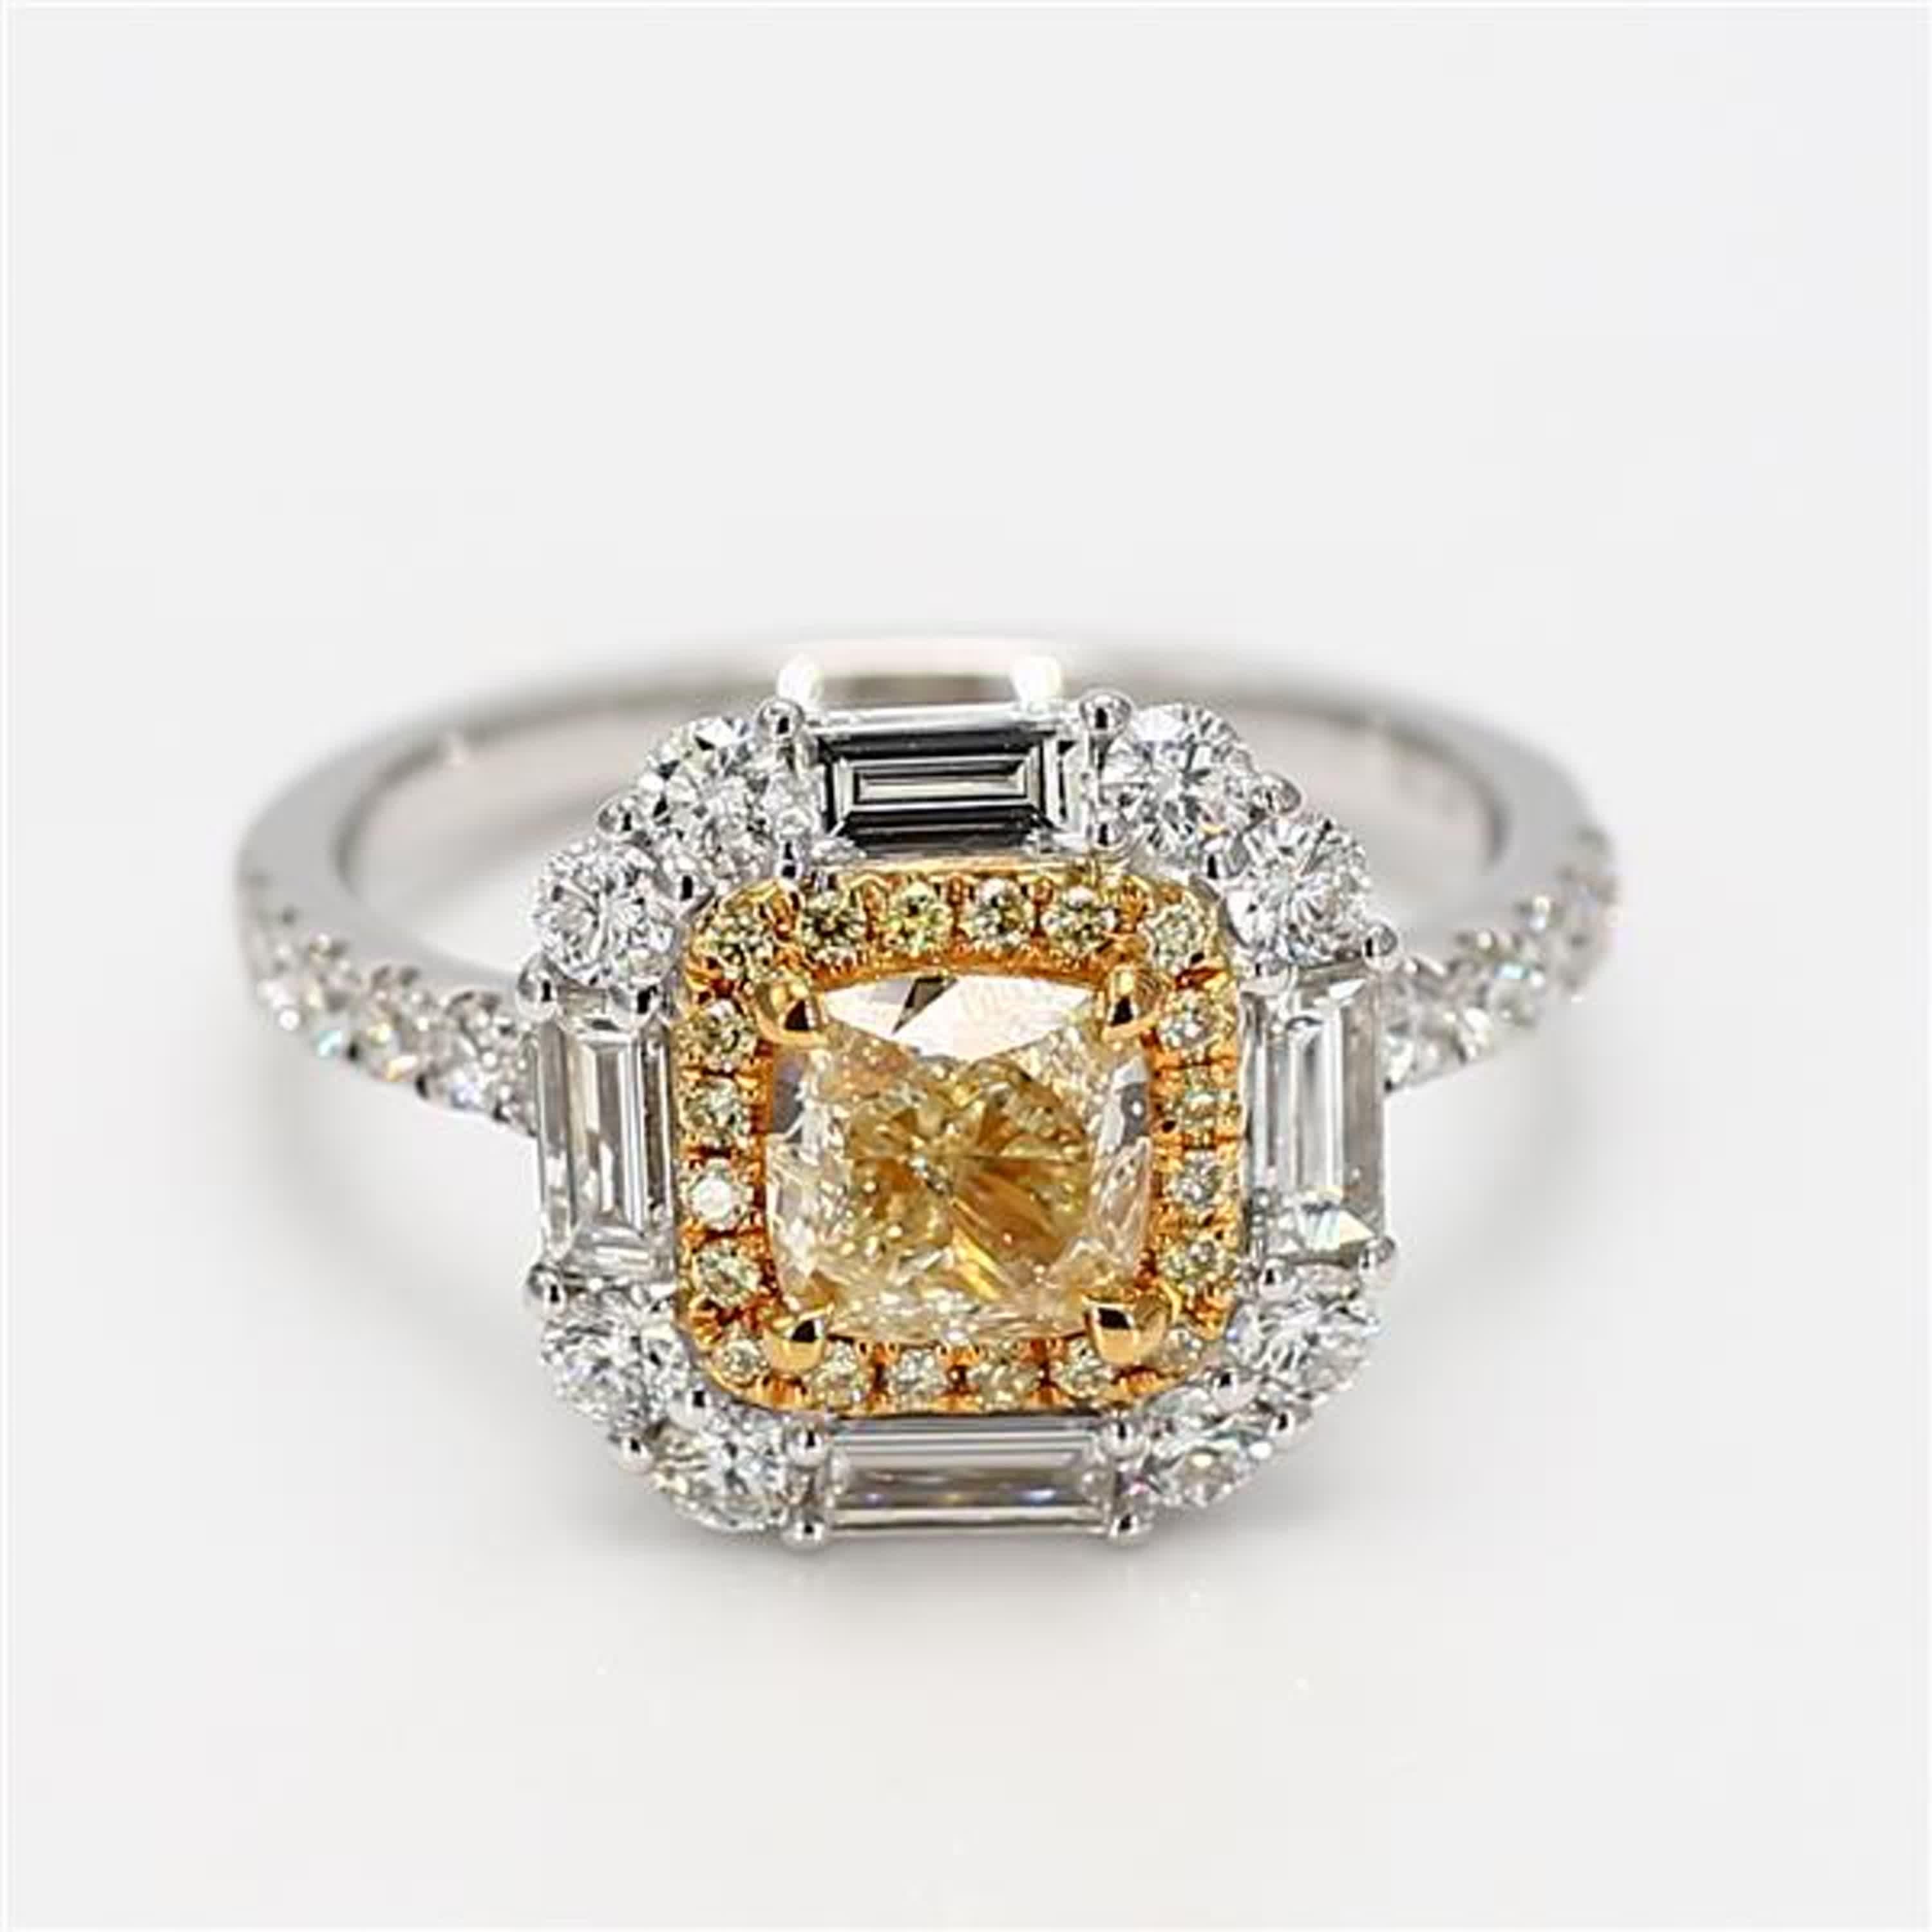 RareGemWorld's classic GIA certified diamond ring. Mounted in a beautiful 18K Yellow and White Gold setting with a natural cushion cut yellow diamond. The yellow diamond is surrounded by natural baguette cut white diamonds, round natural yellow